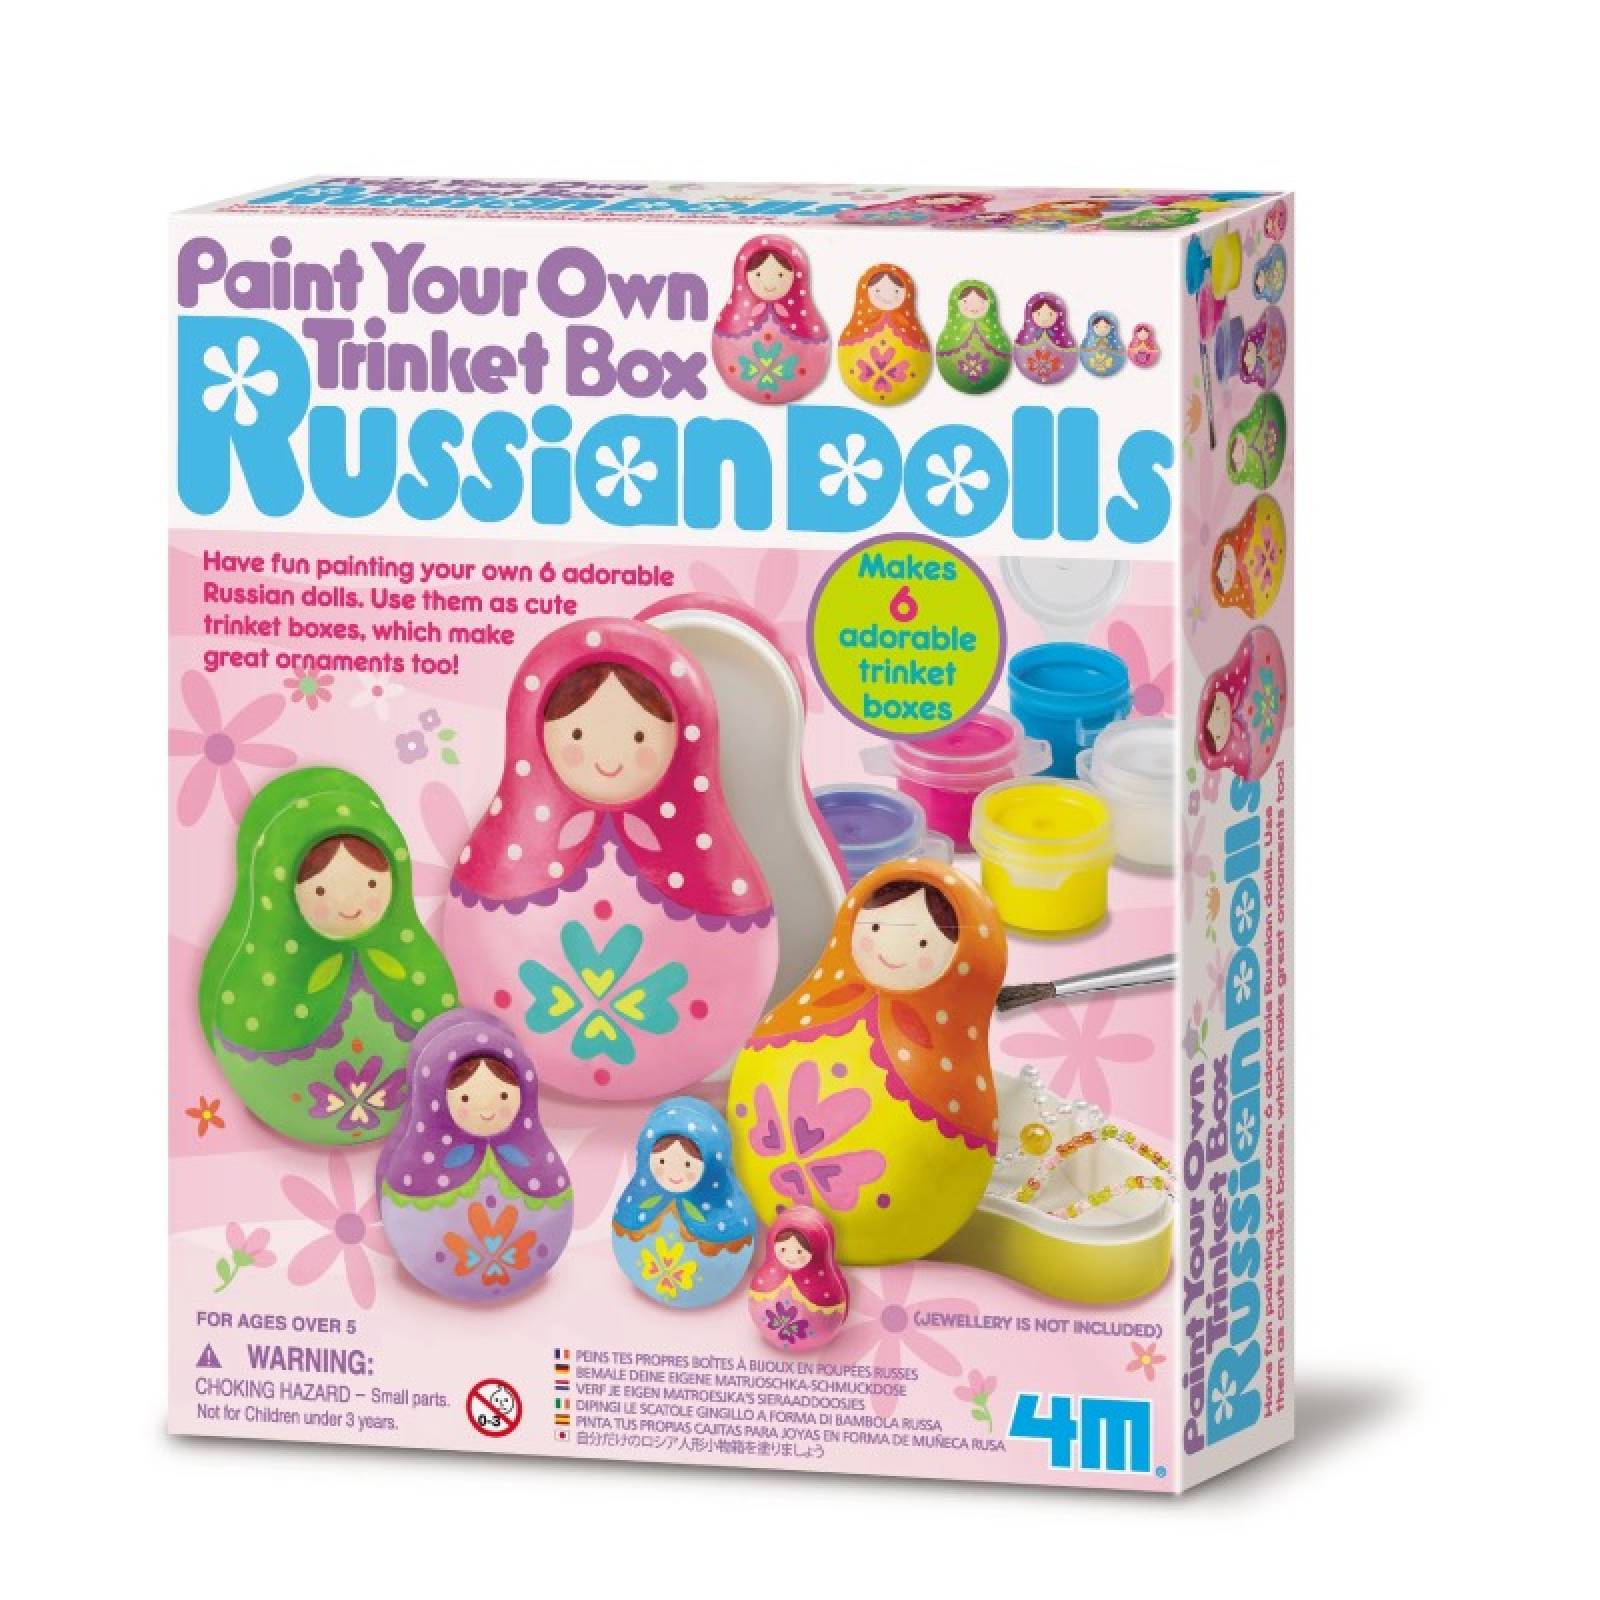 Paint Your Own Trinket Box Russian Dolls 8+